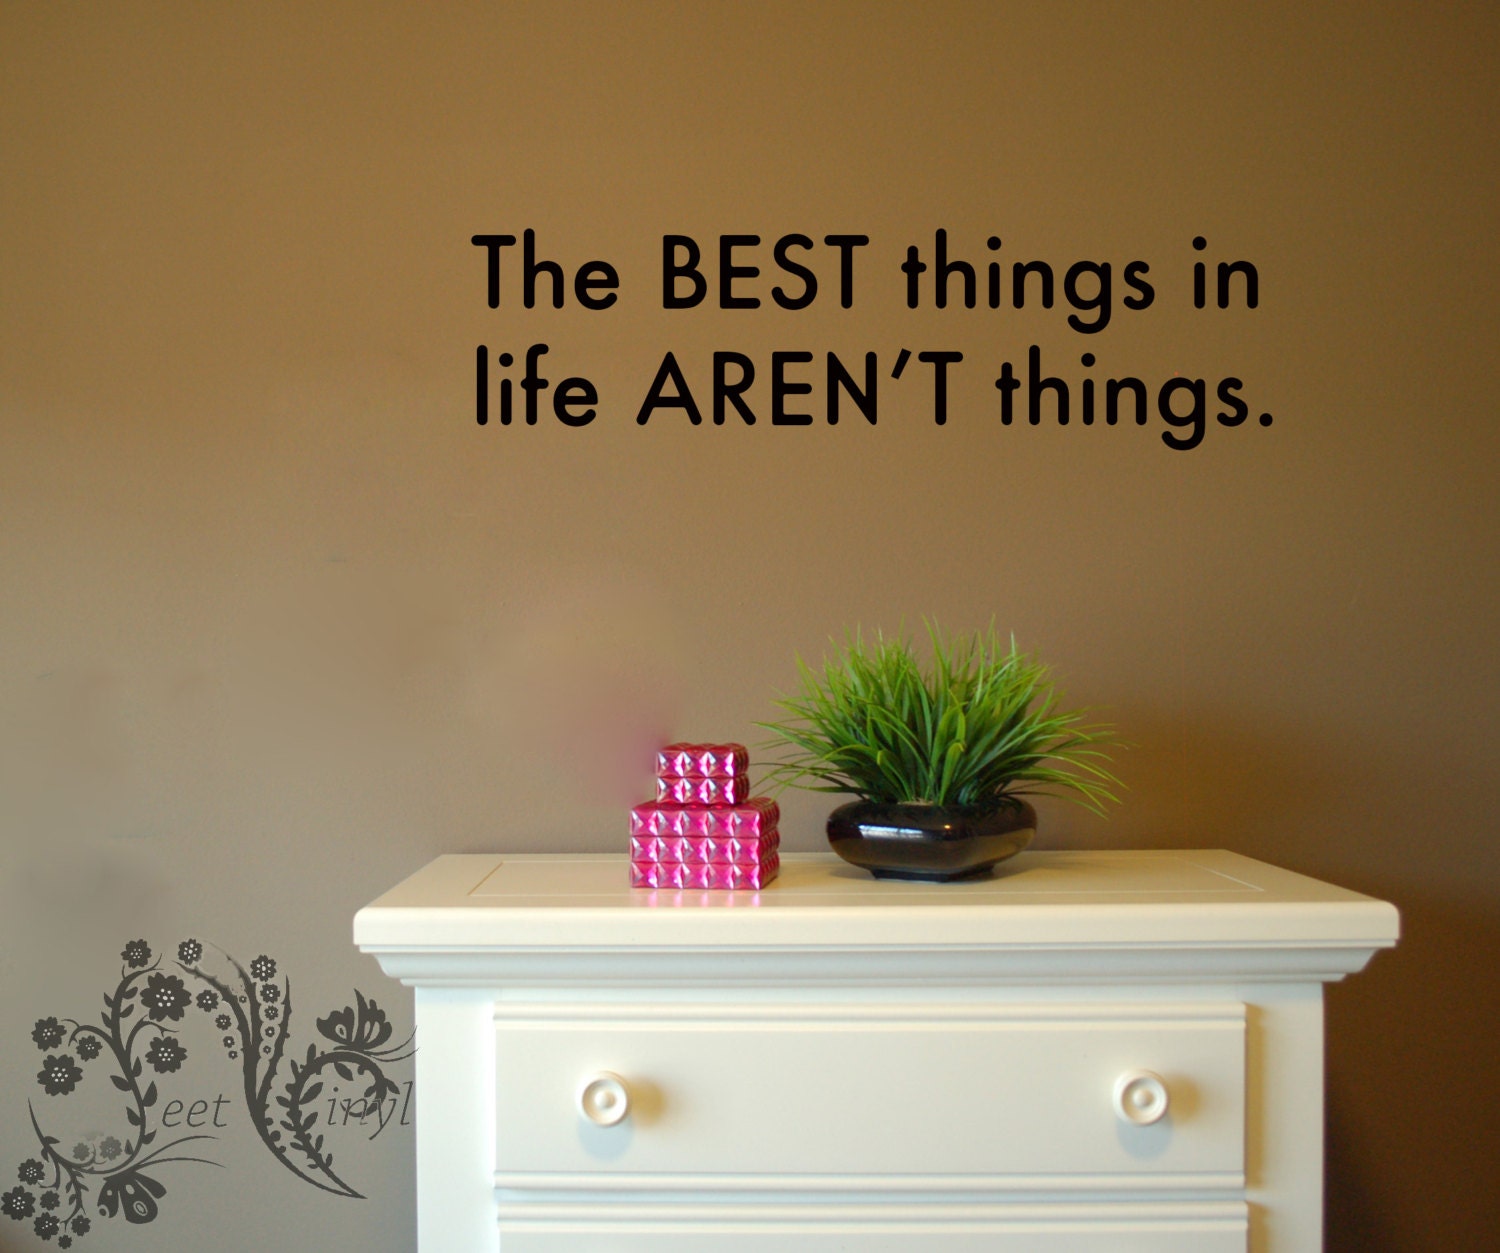 The BEST things in life AREN'T things. Family wall